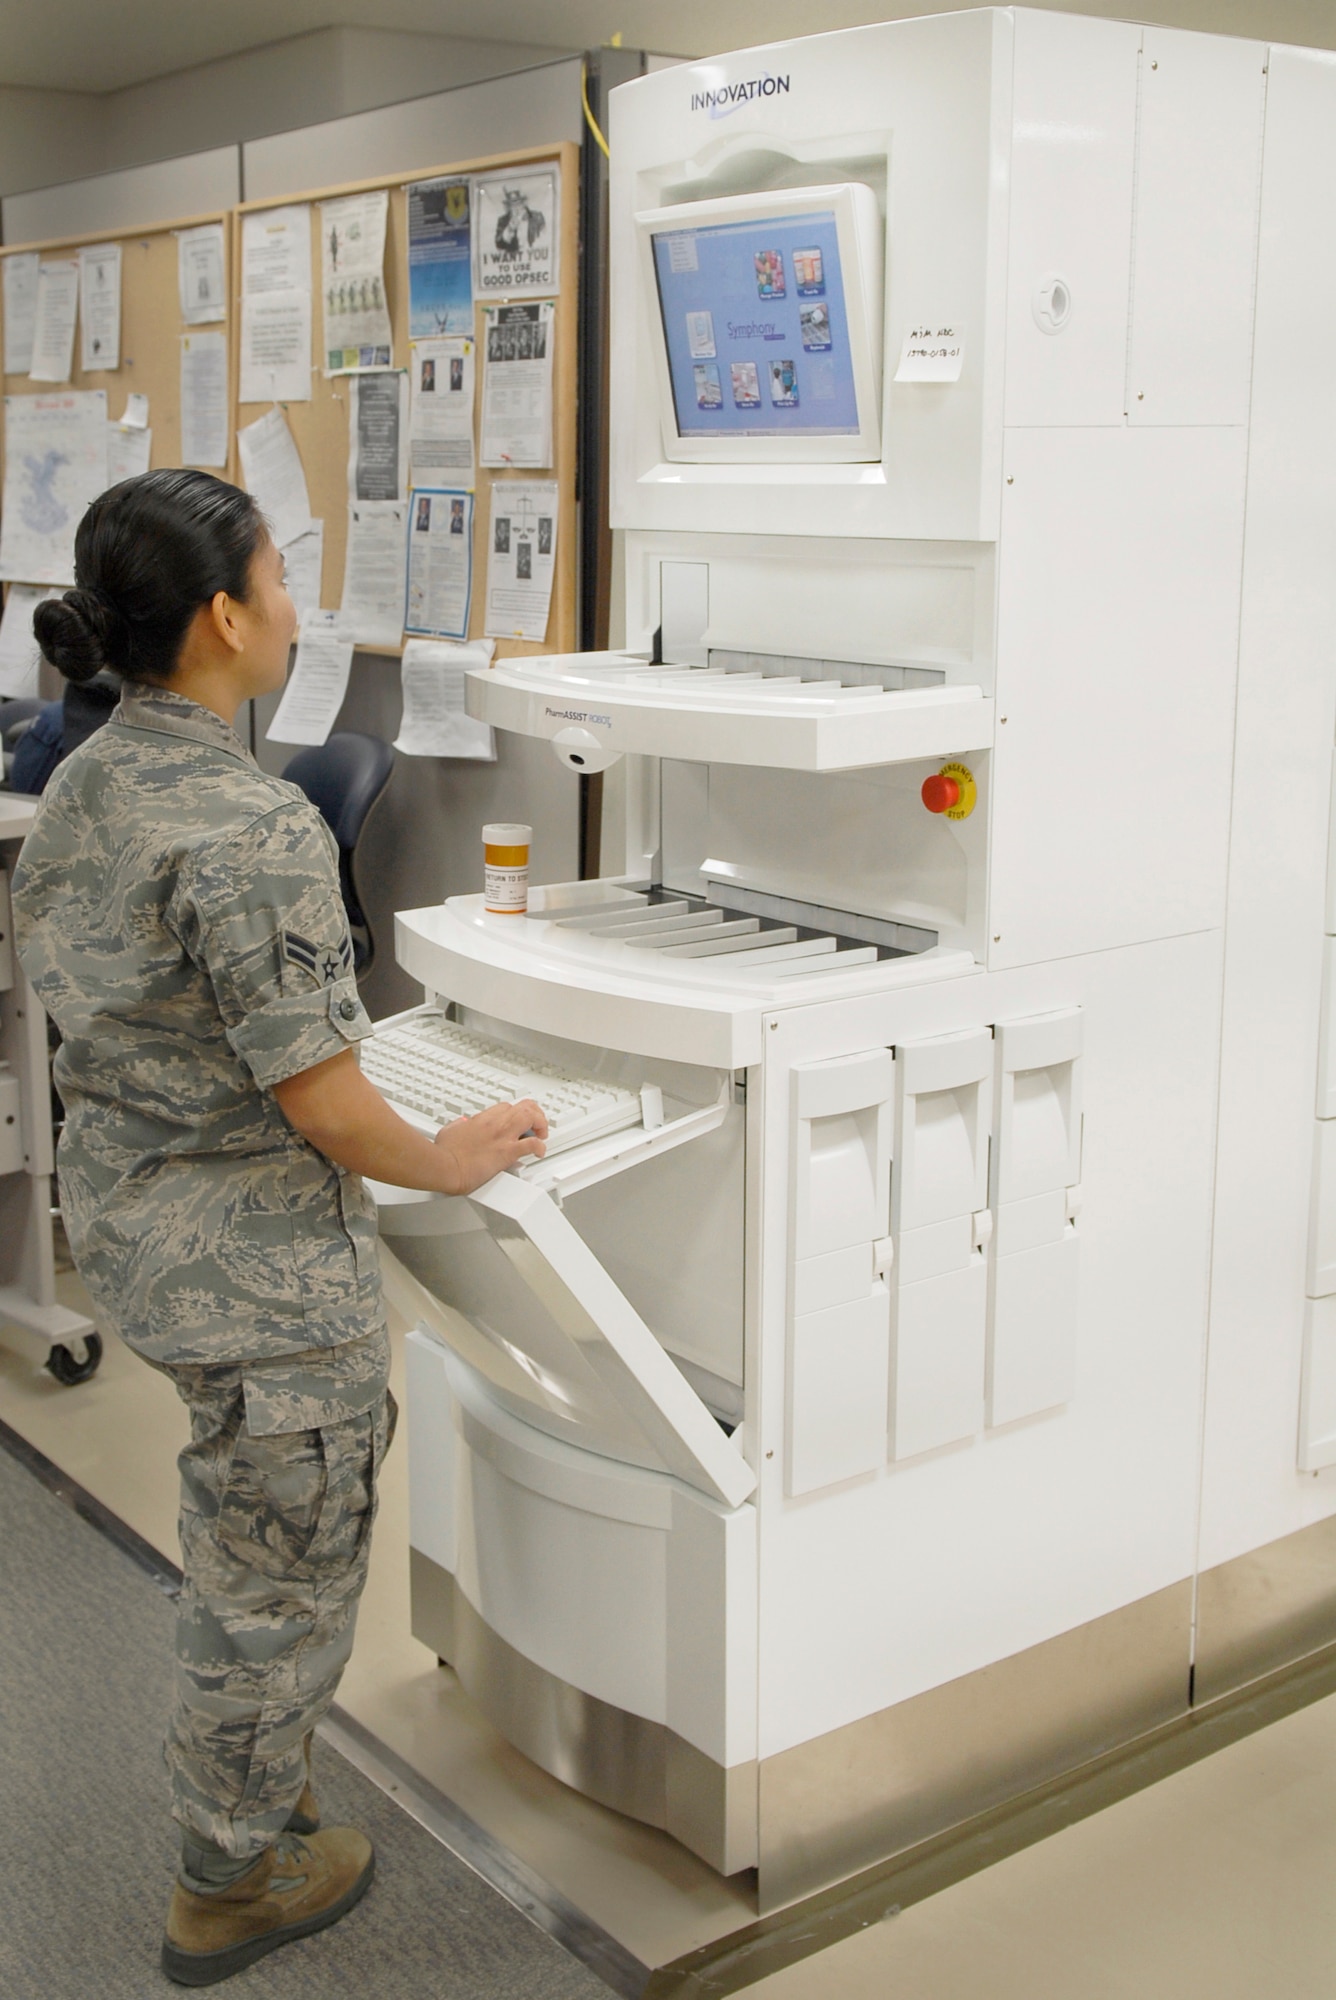 Airman 1st Class Roma Terry begins running a check on the new pharmacy robot Dec. 10, 2010, at Kadena Air Base, Japan. The PharmASSIST ROBOTx has established quality checkpoints throughout the pharmacy by employing bar code scanning, digital images of medications and original paper prescriptions, and protocols at every stage of the prescription filling process. Airman Terry is a pharmacy technician with the 18th Medical Support Squadron. (U.S. Air Force photo/Airman 1st Class Tara A. Williamson)